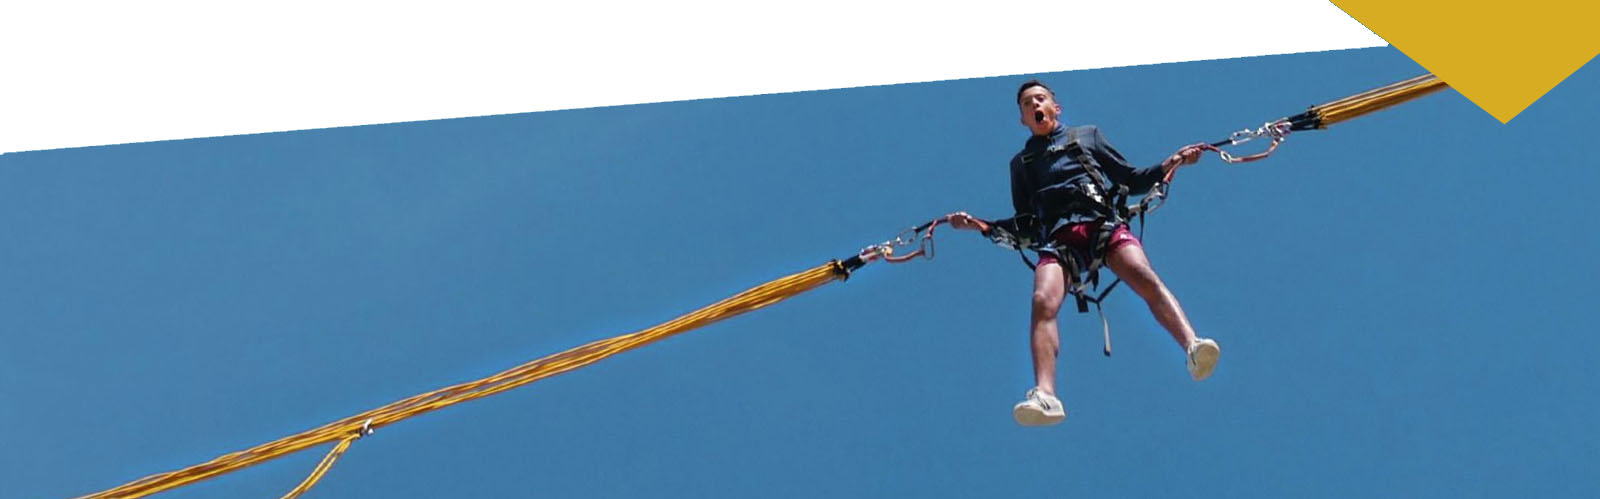 Bungy_ejection1